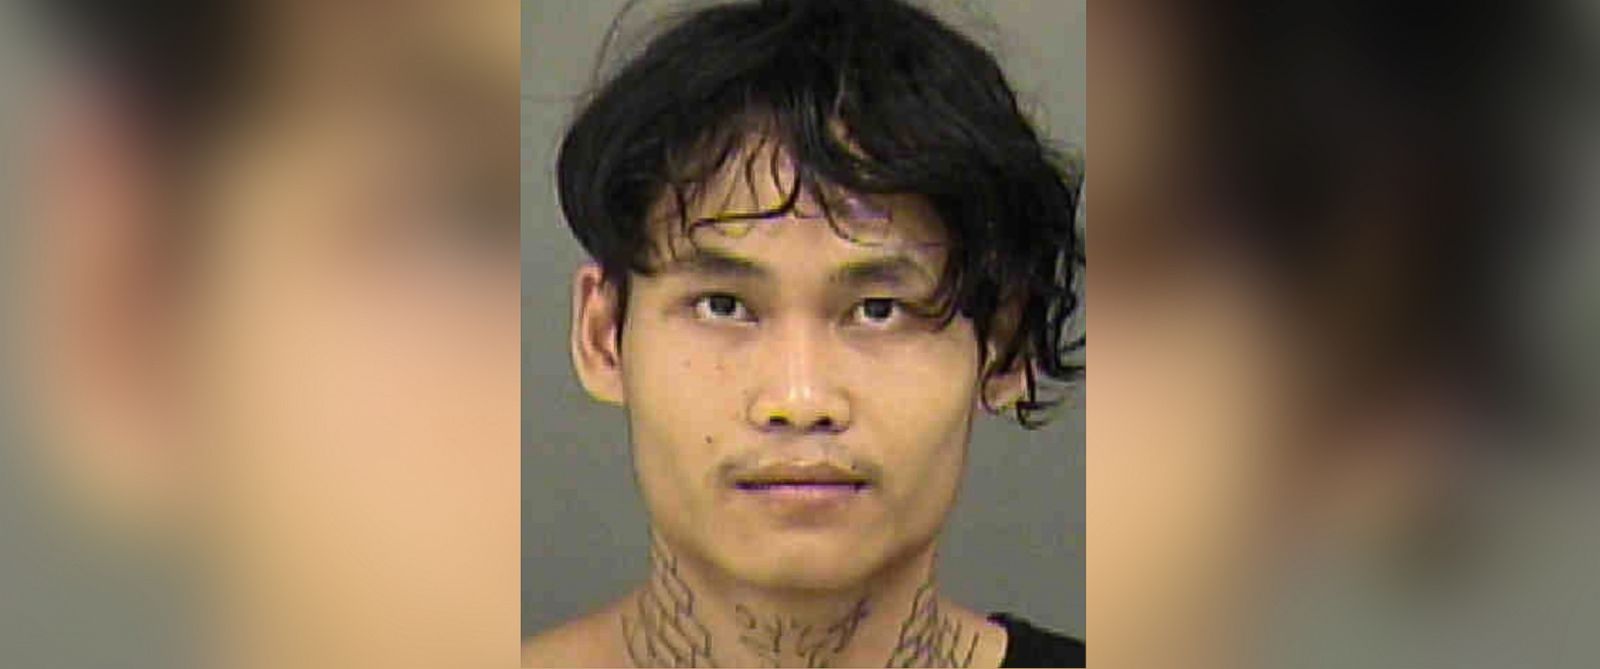 PHOTO: Tun Lon Sein, 22, was arrested in Charlotte, N.C. on May 25, 2017 for allegedly interfering with flight crew members and attendants.